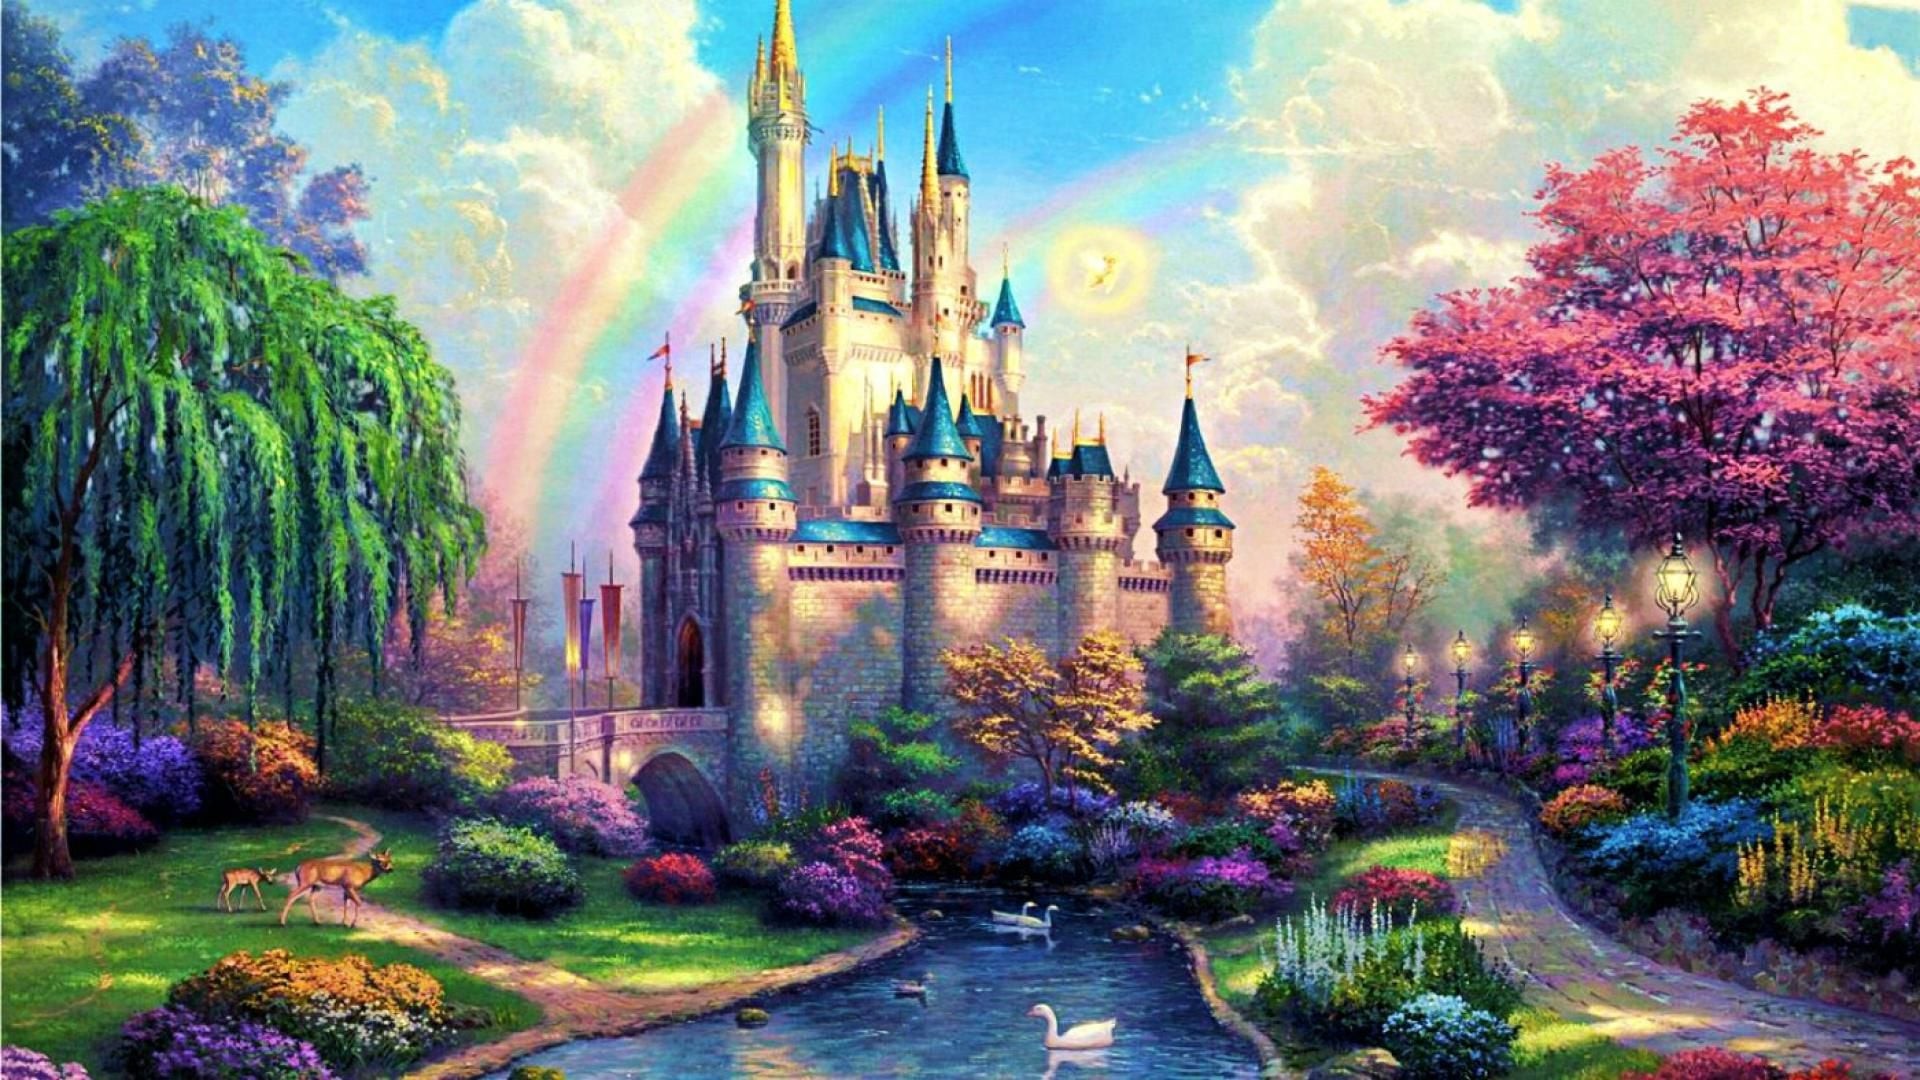 1920x1080 Pin Fairy Tale Wallpapers on Pinterest